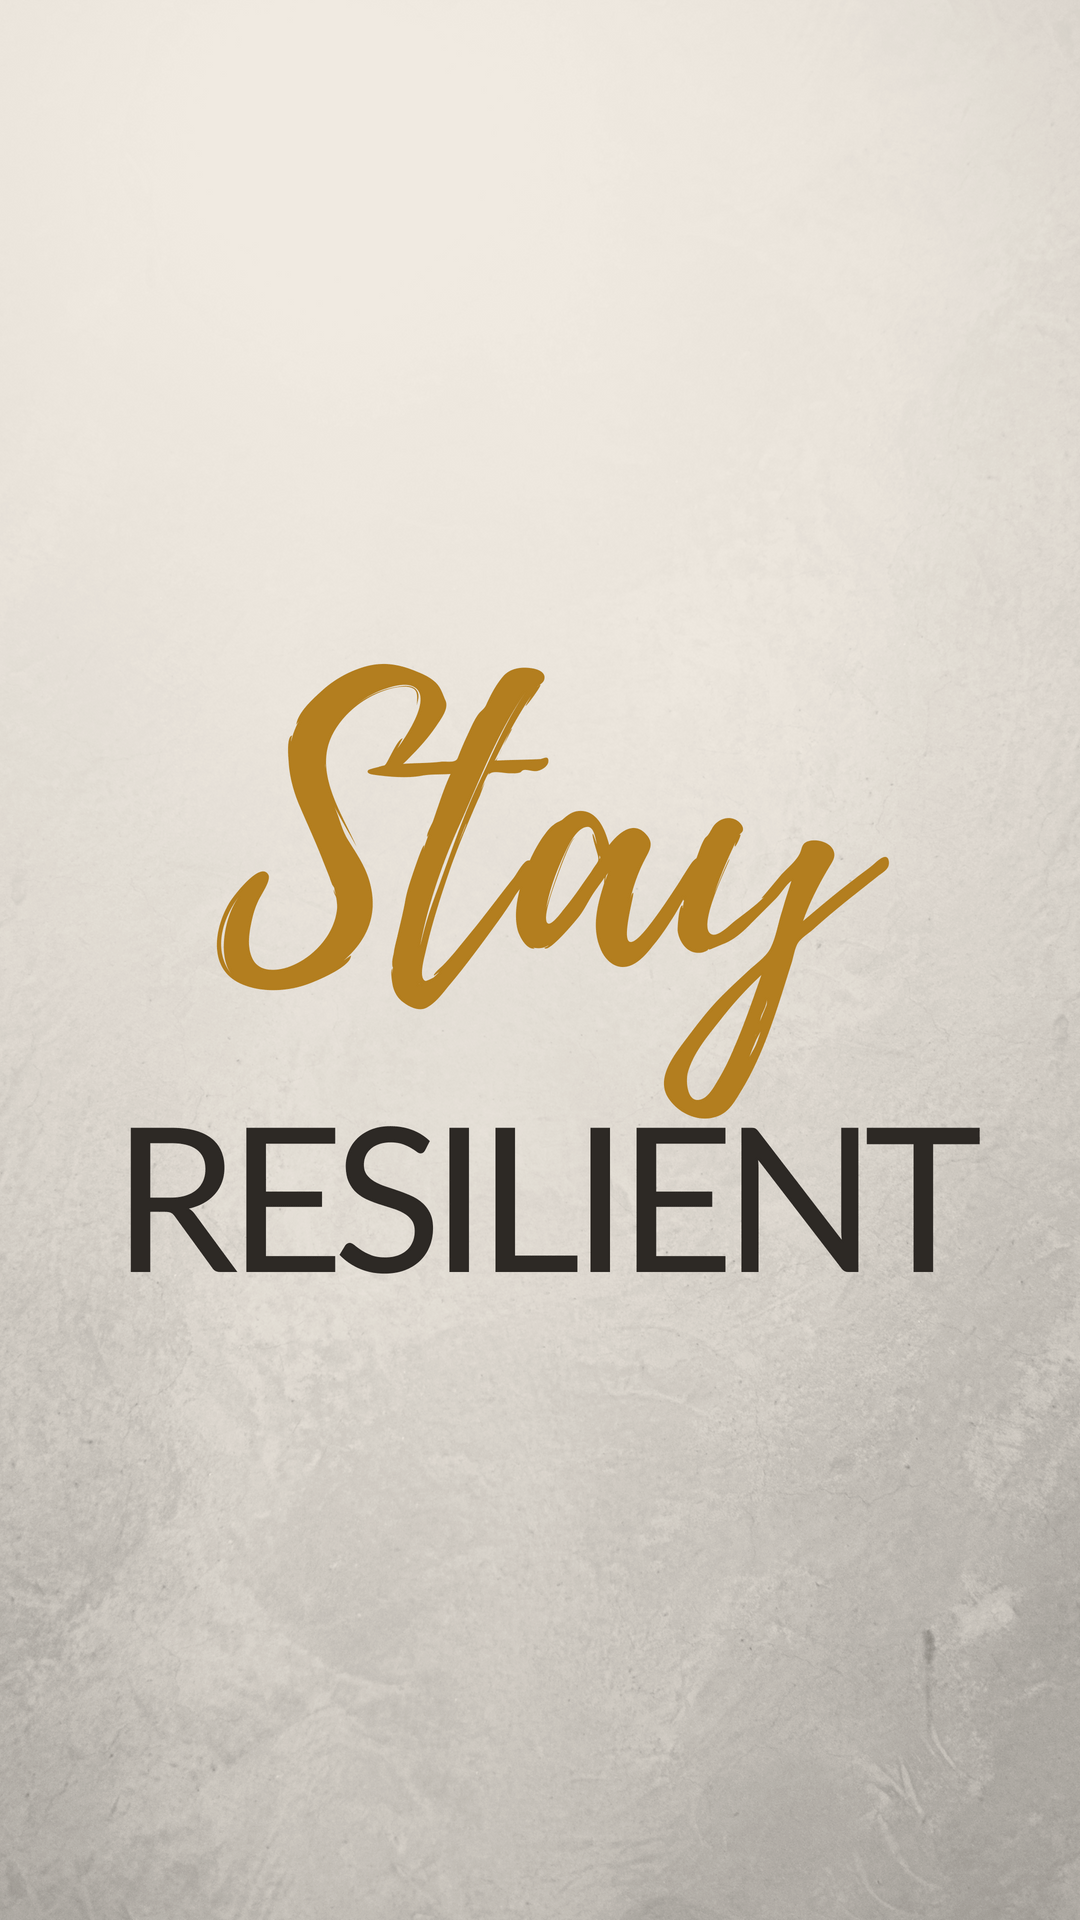 Resilience Wallpaper • Resilient Campus